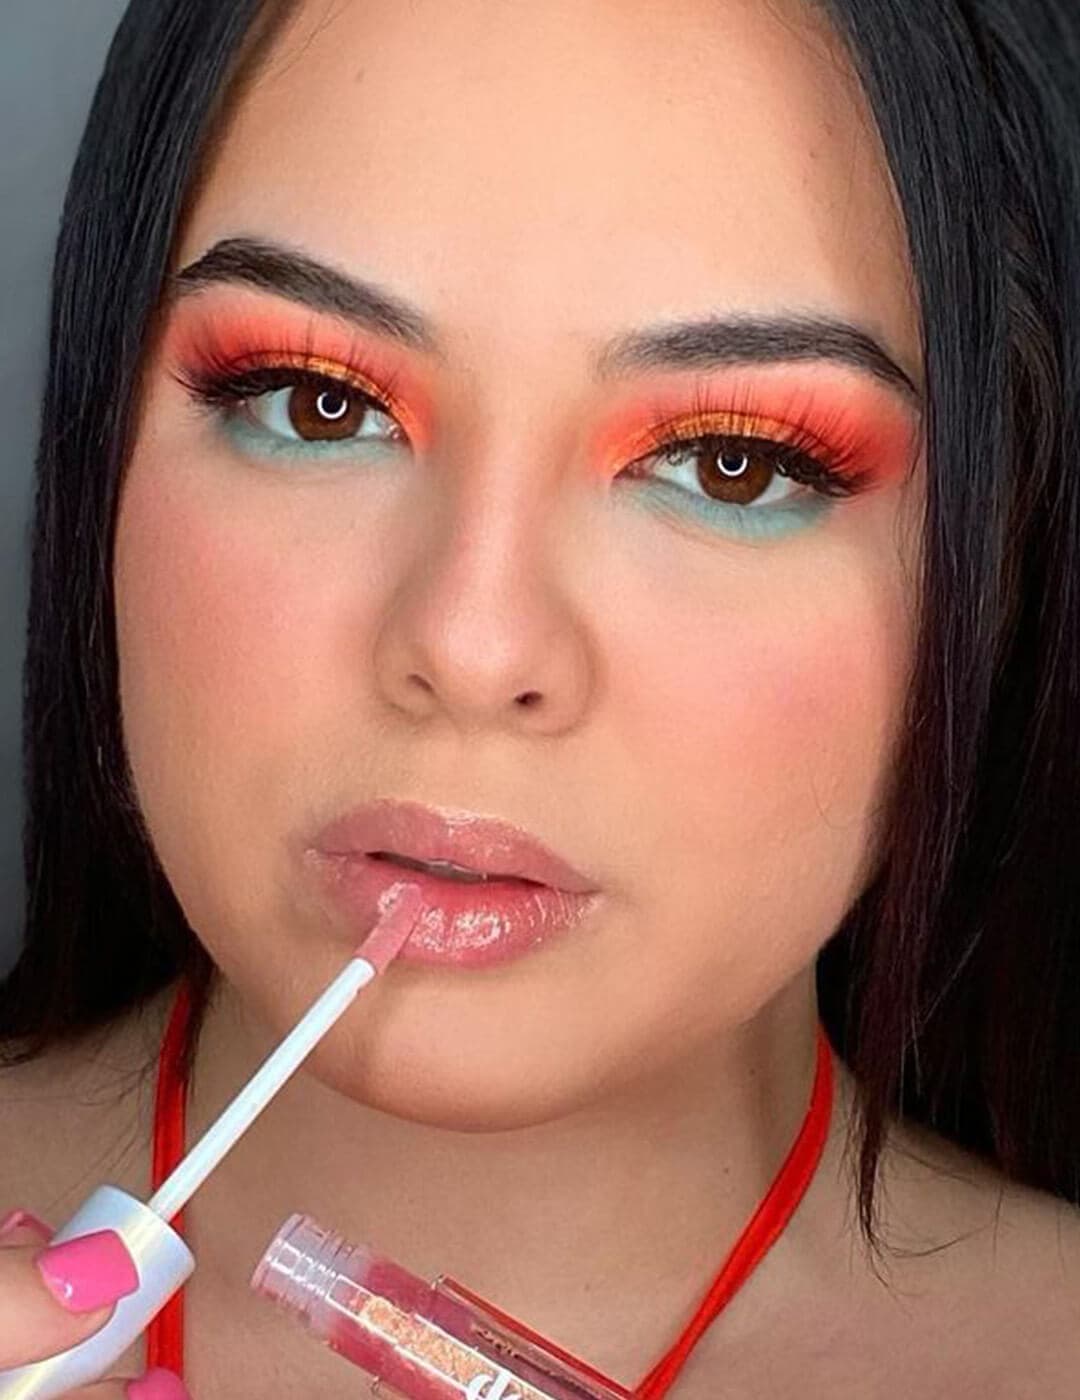 Close-up of a beautiful woman with orange and green eye makeup look applying lip gloss on her lips